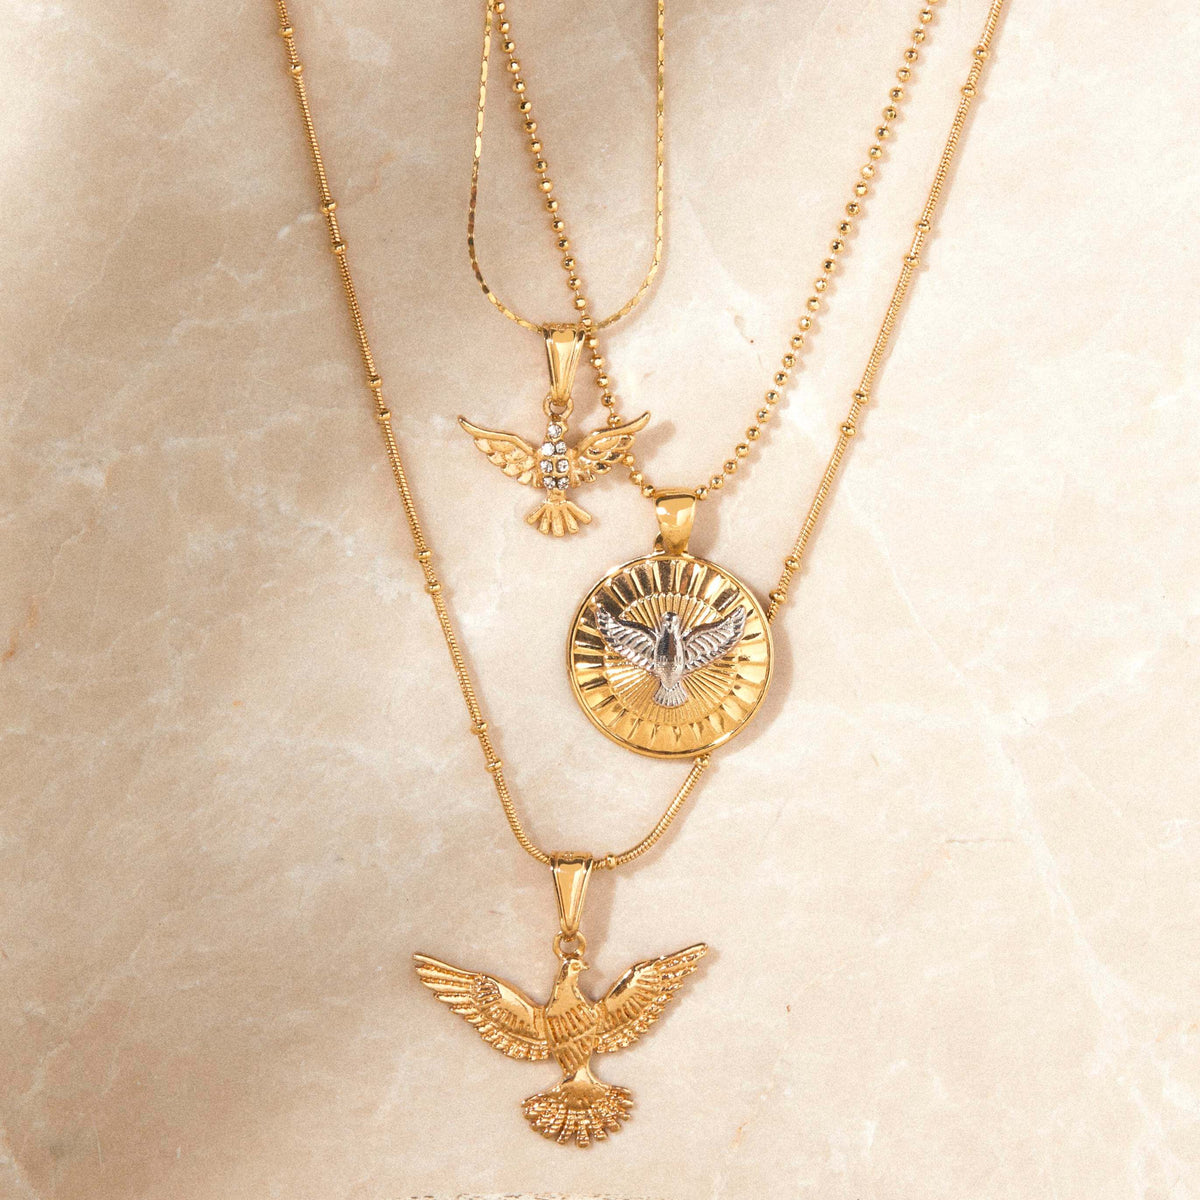 White Winged Dove Necklace